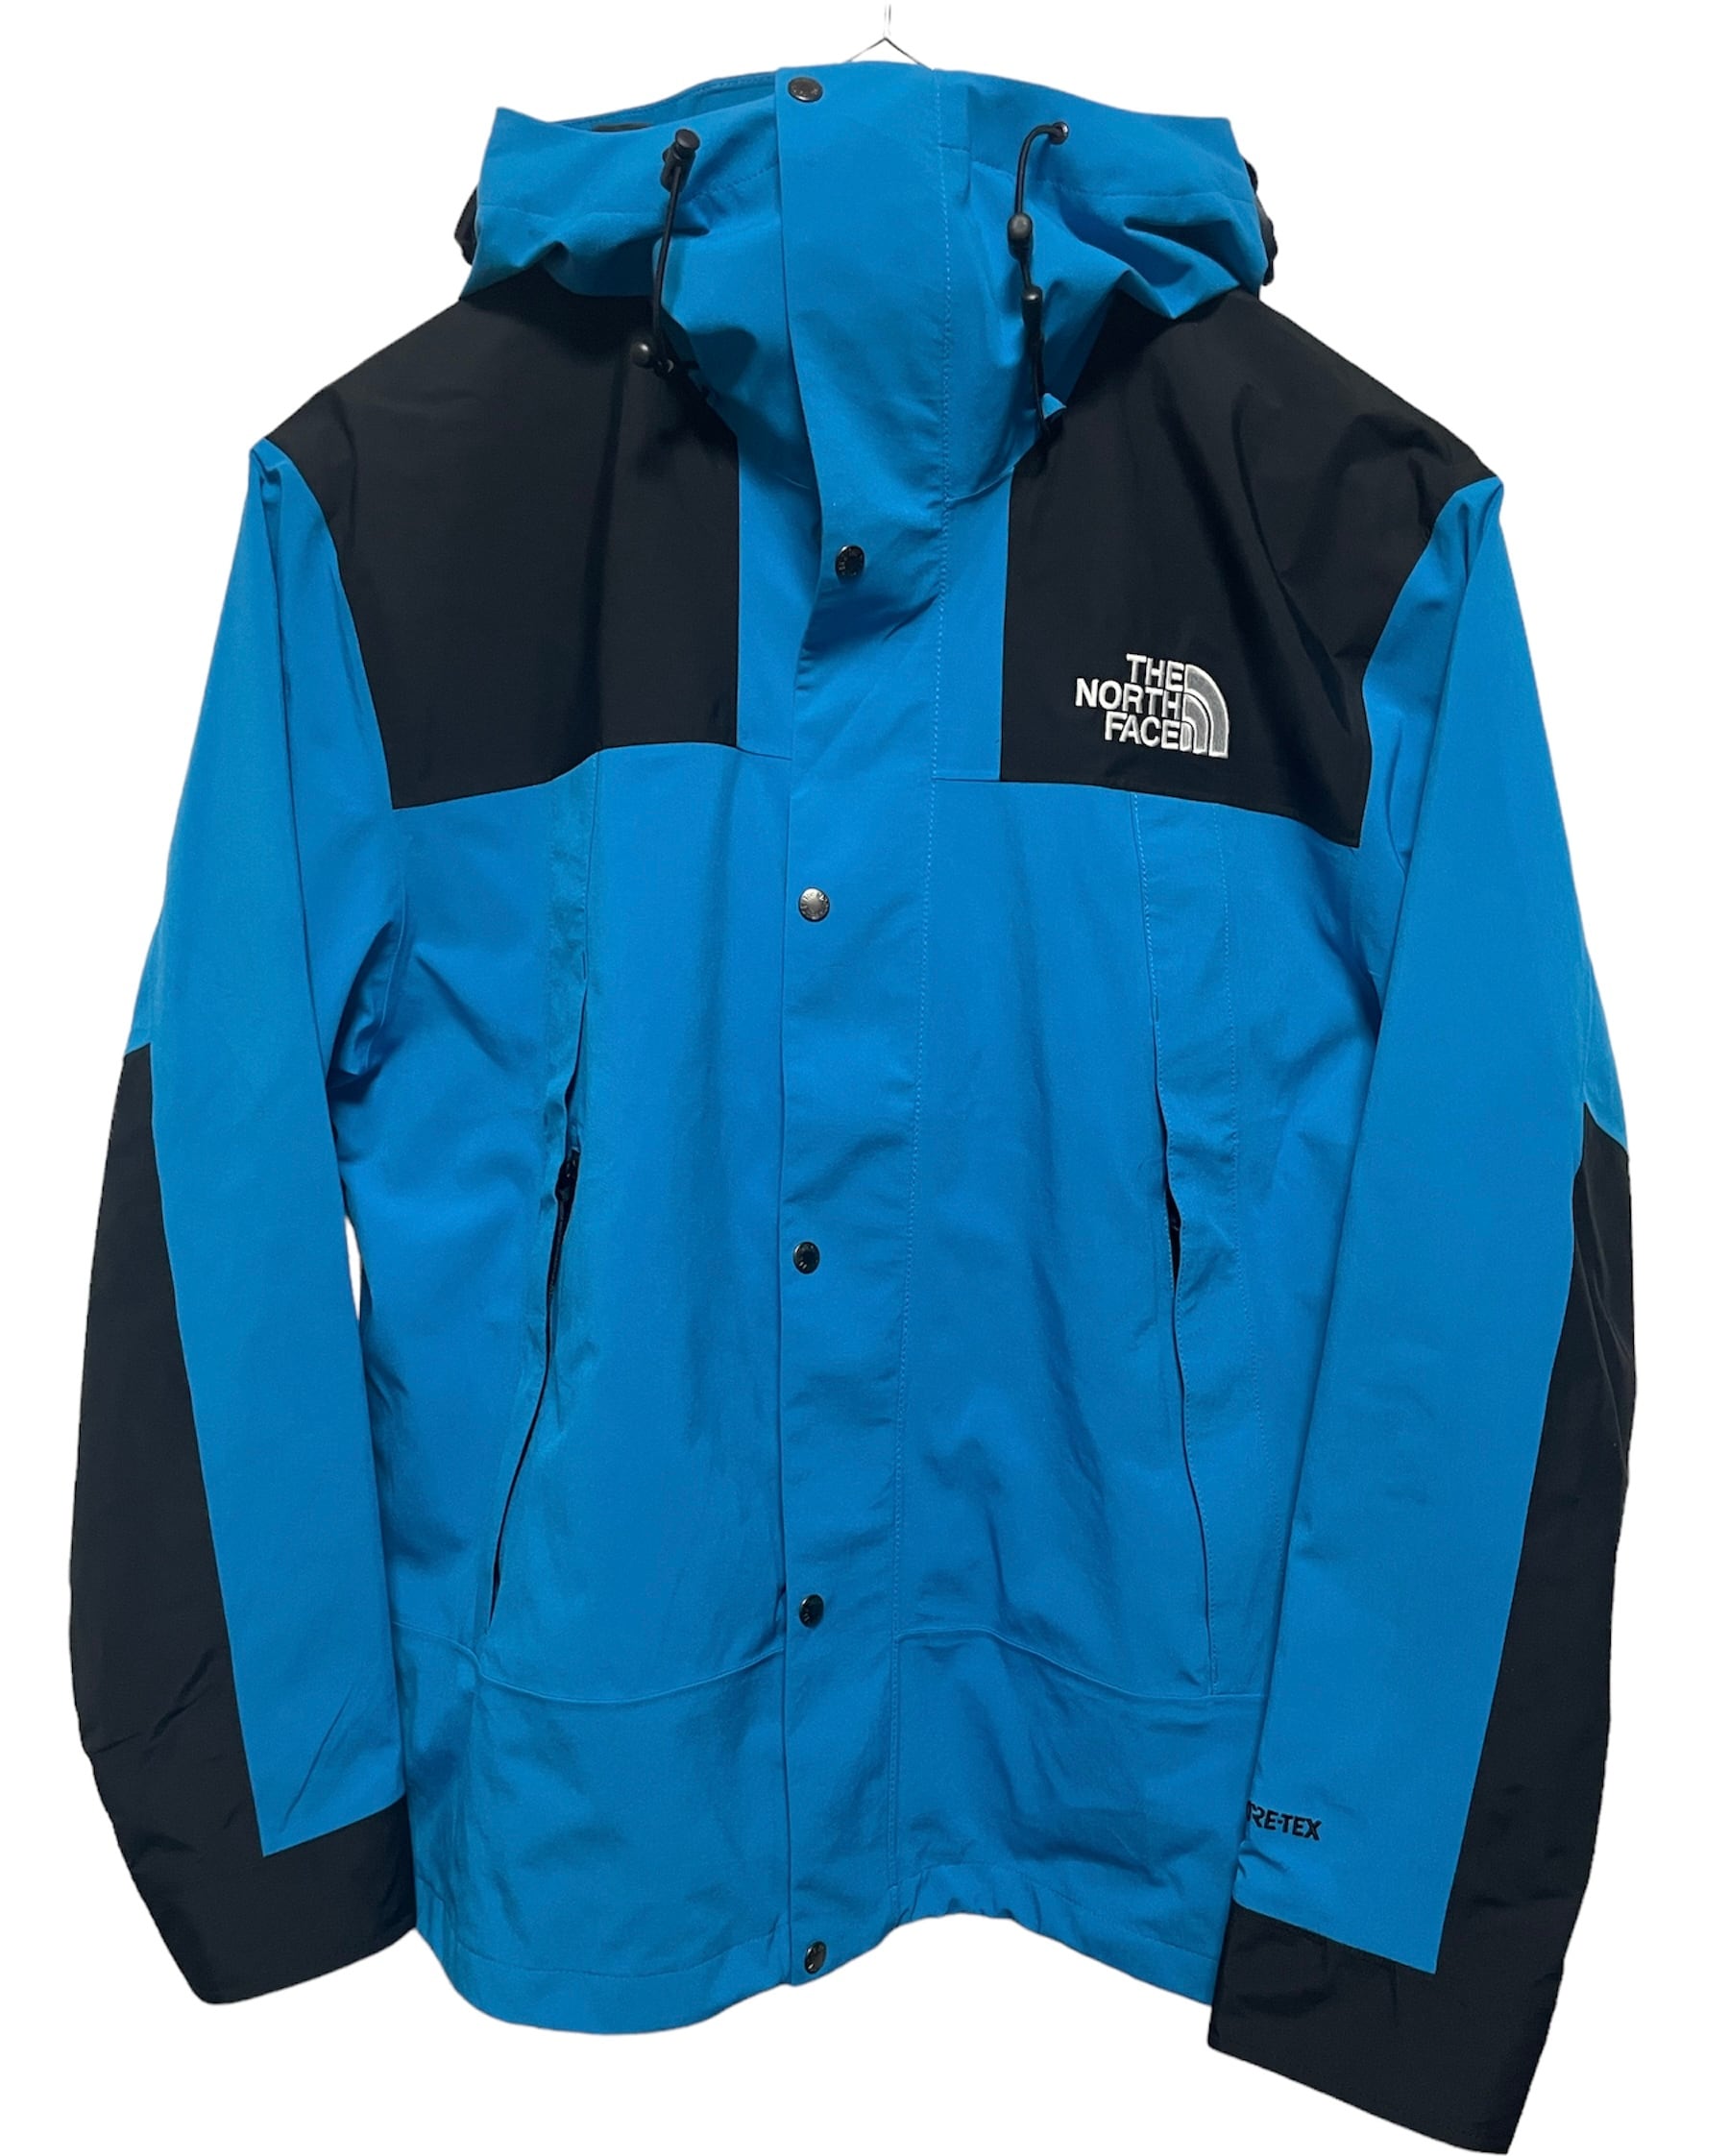 THE NORTH FACE - 1990 gore-tex mountain jacket (SIZE:L) | Penny's 